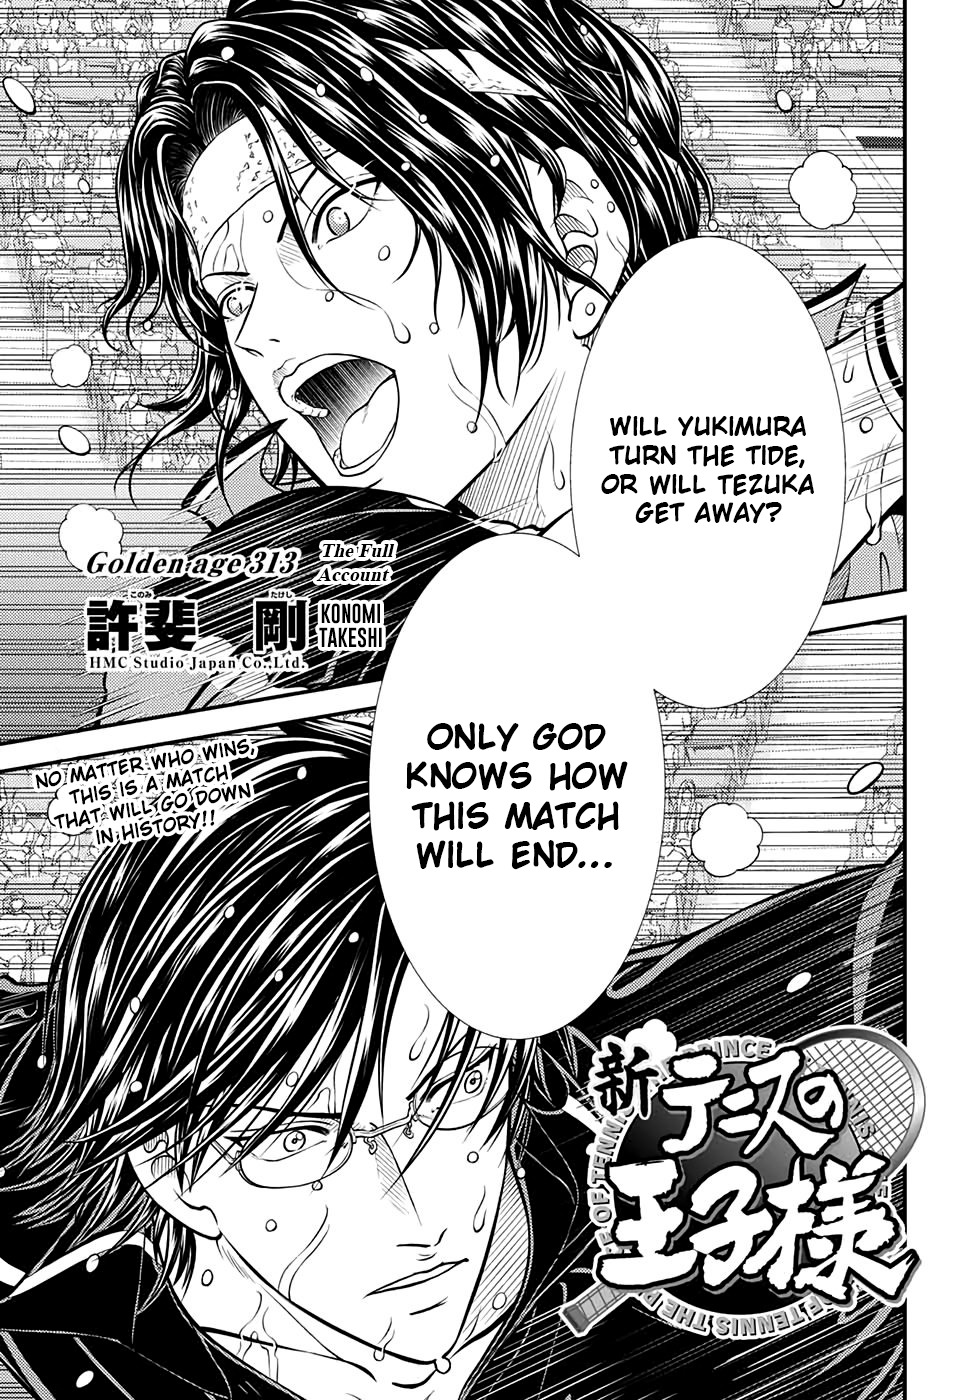 New Prince Of Tennis Vol.32 Chapter 313: Golden Age 313 The Full Account - Picture 1